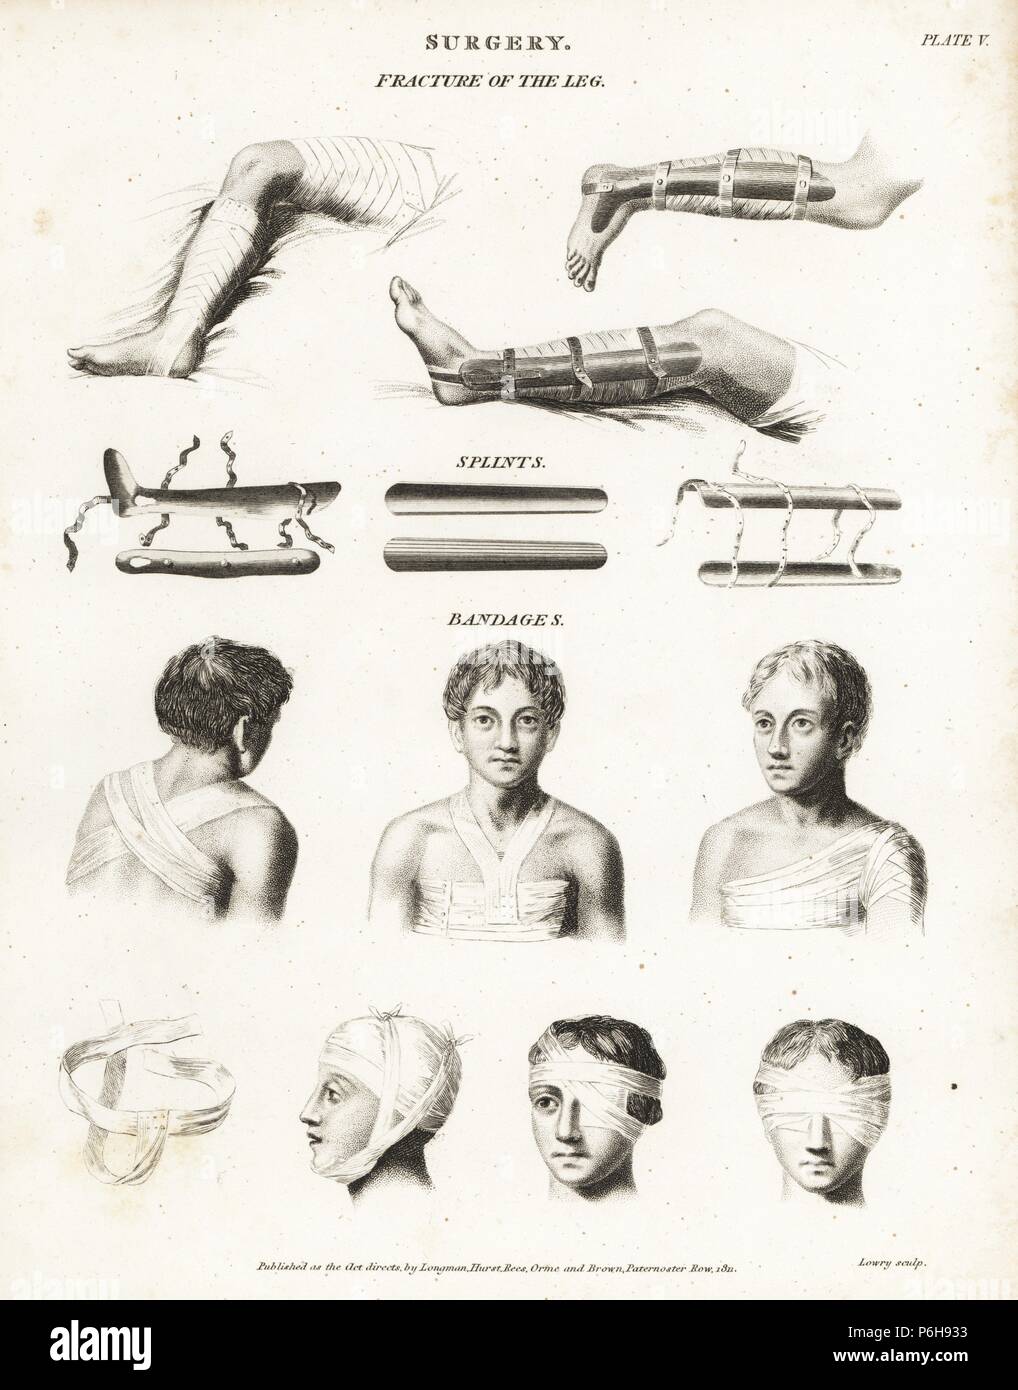 Surgical procedures from the 19th century: splints and bandages for a fracture of the leg. Copperplate engraving by Wilson Lowry from Abraham Rees' 'Cyclopedia or Universal Dictionary,' London, 1810. Stock Photo